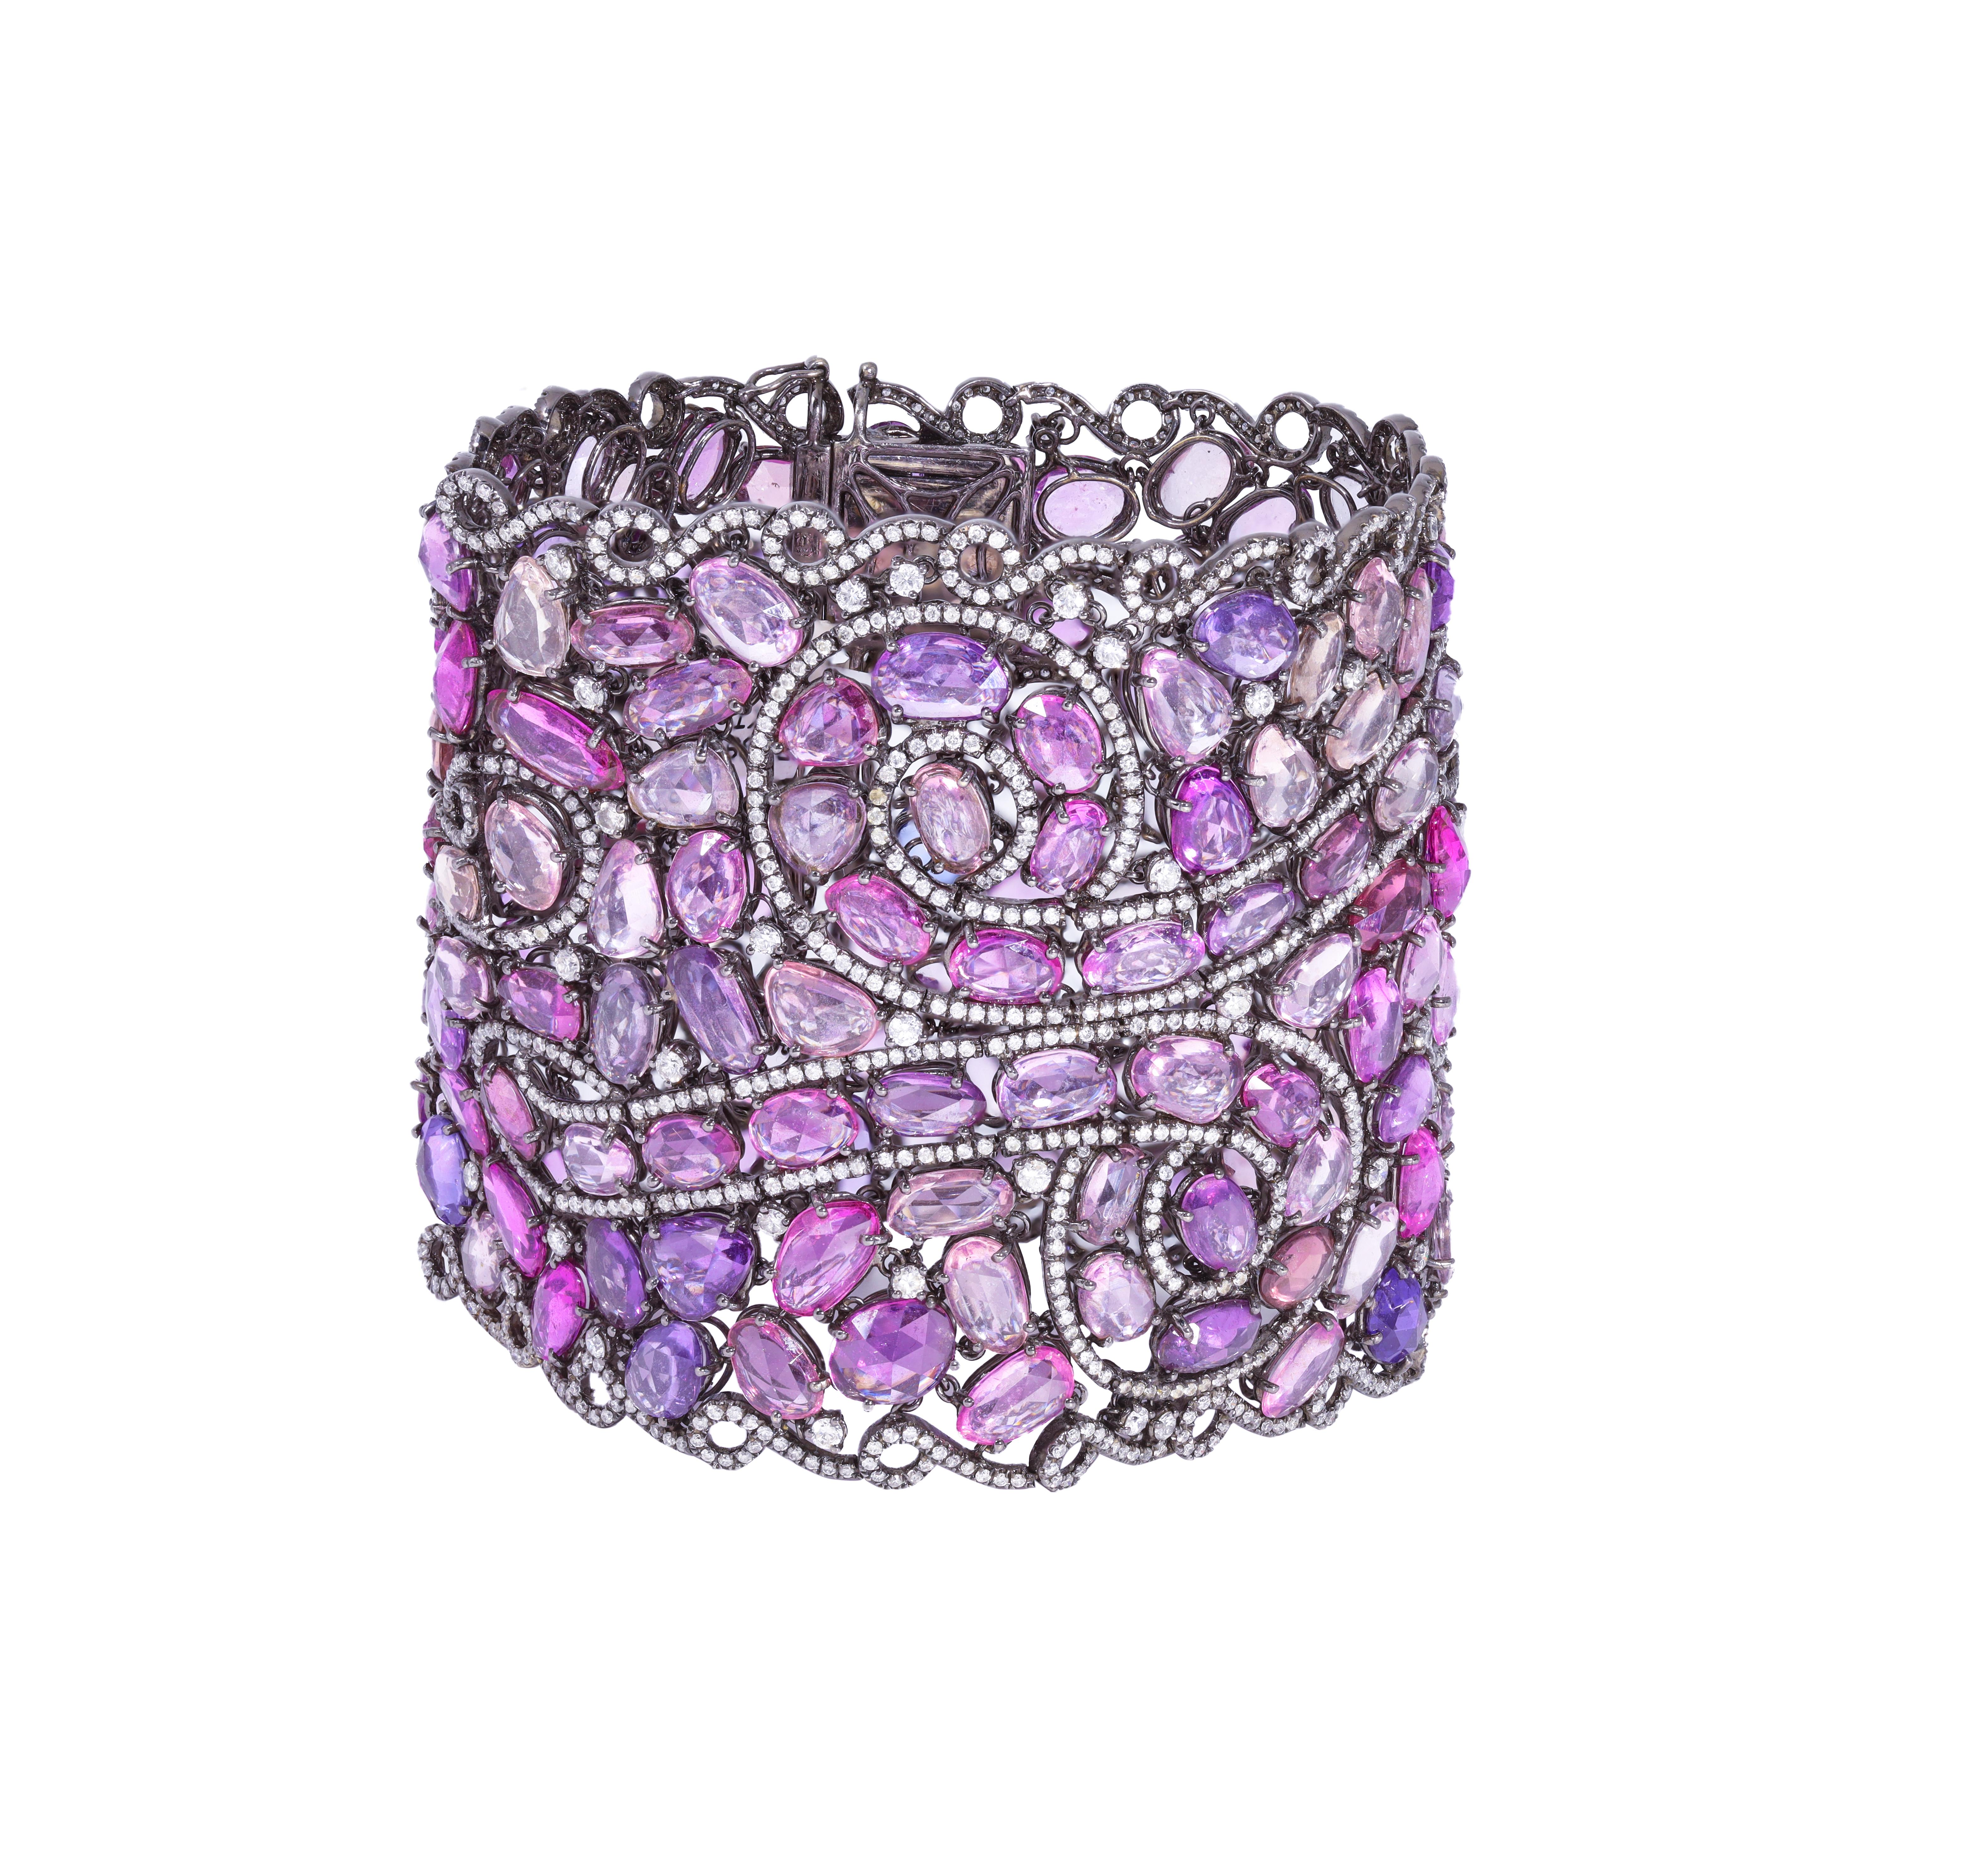 18kt white gold bracelet featuring 155.51 cts of unheated pink sapphires and 10.00 cts of round diamonds (C.Dunaigre Certified) 
Diana M. is a leading supplier of top-quality fine jewelry for over 35 years.
Diana M is one-stop shop for all your